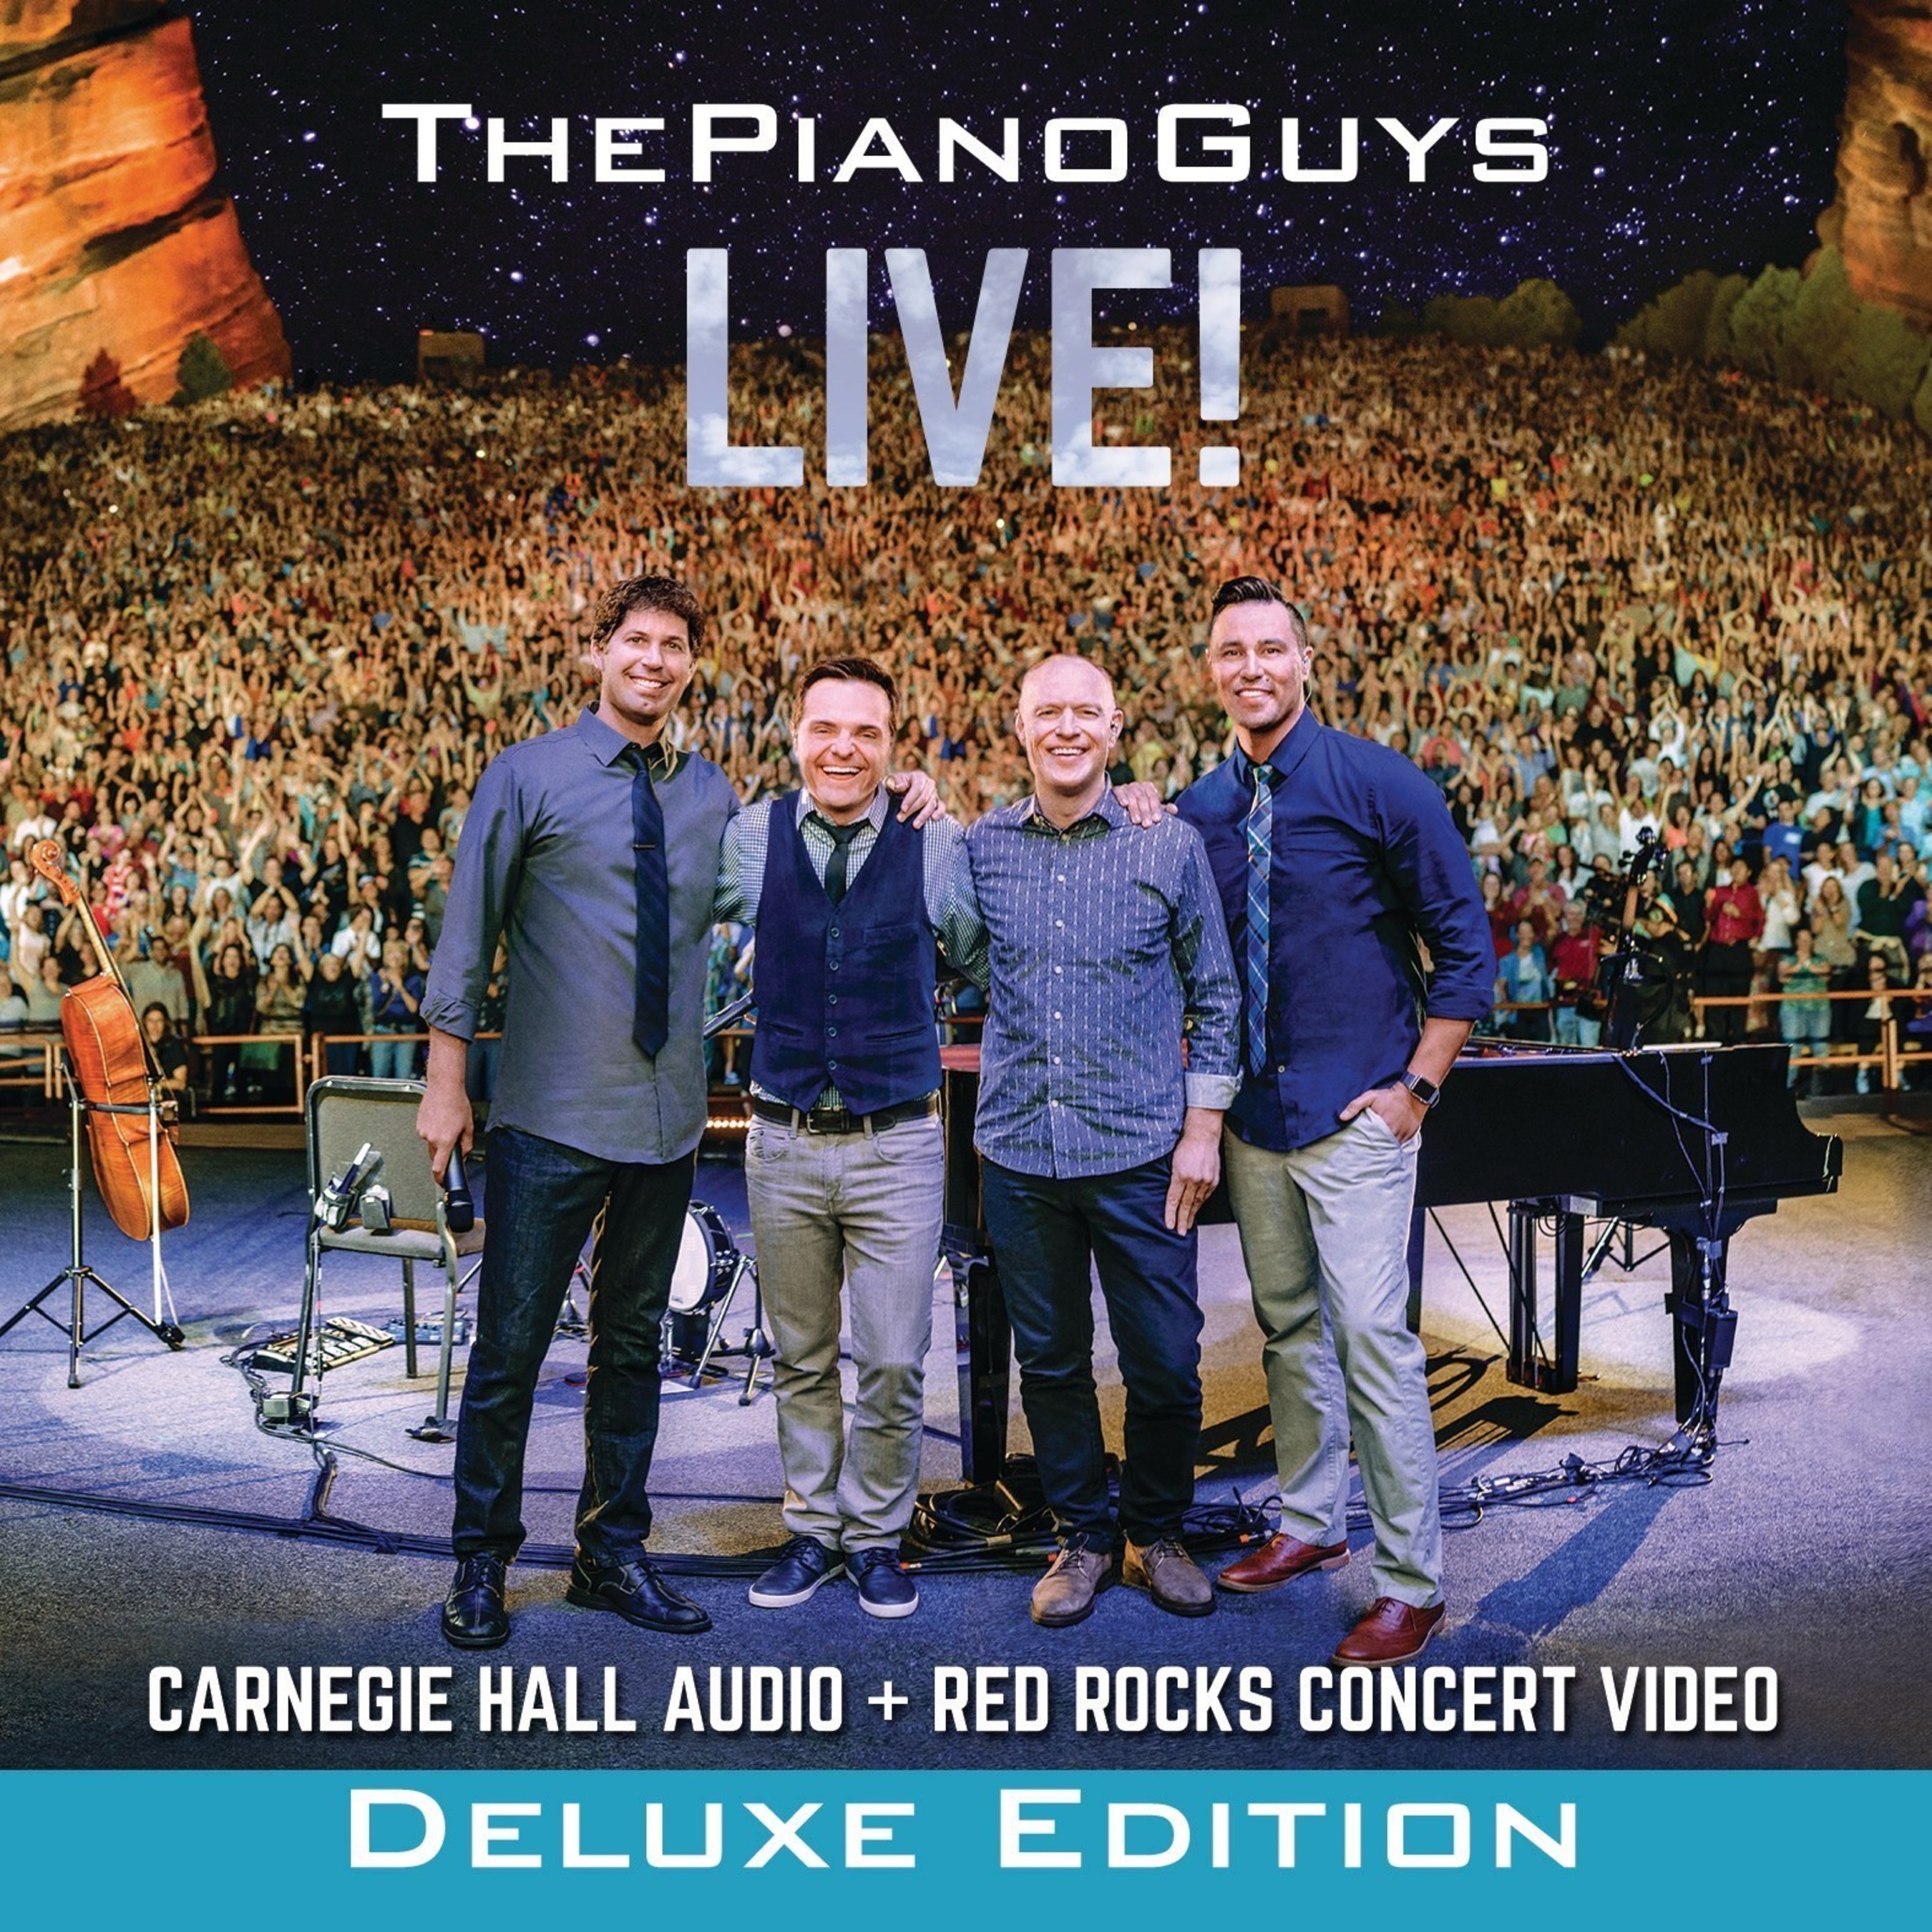 THE PIANO GUYS FIRST LIVE ALBUM Available November 13, 2015